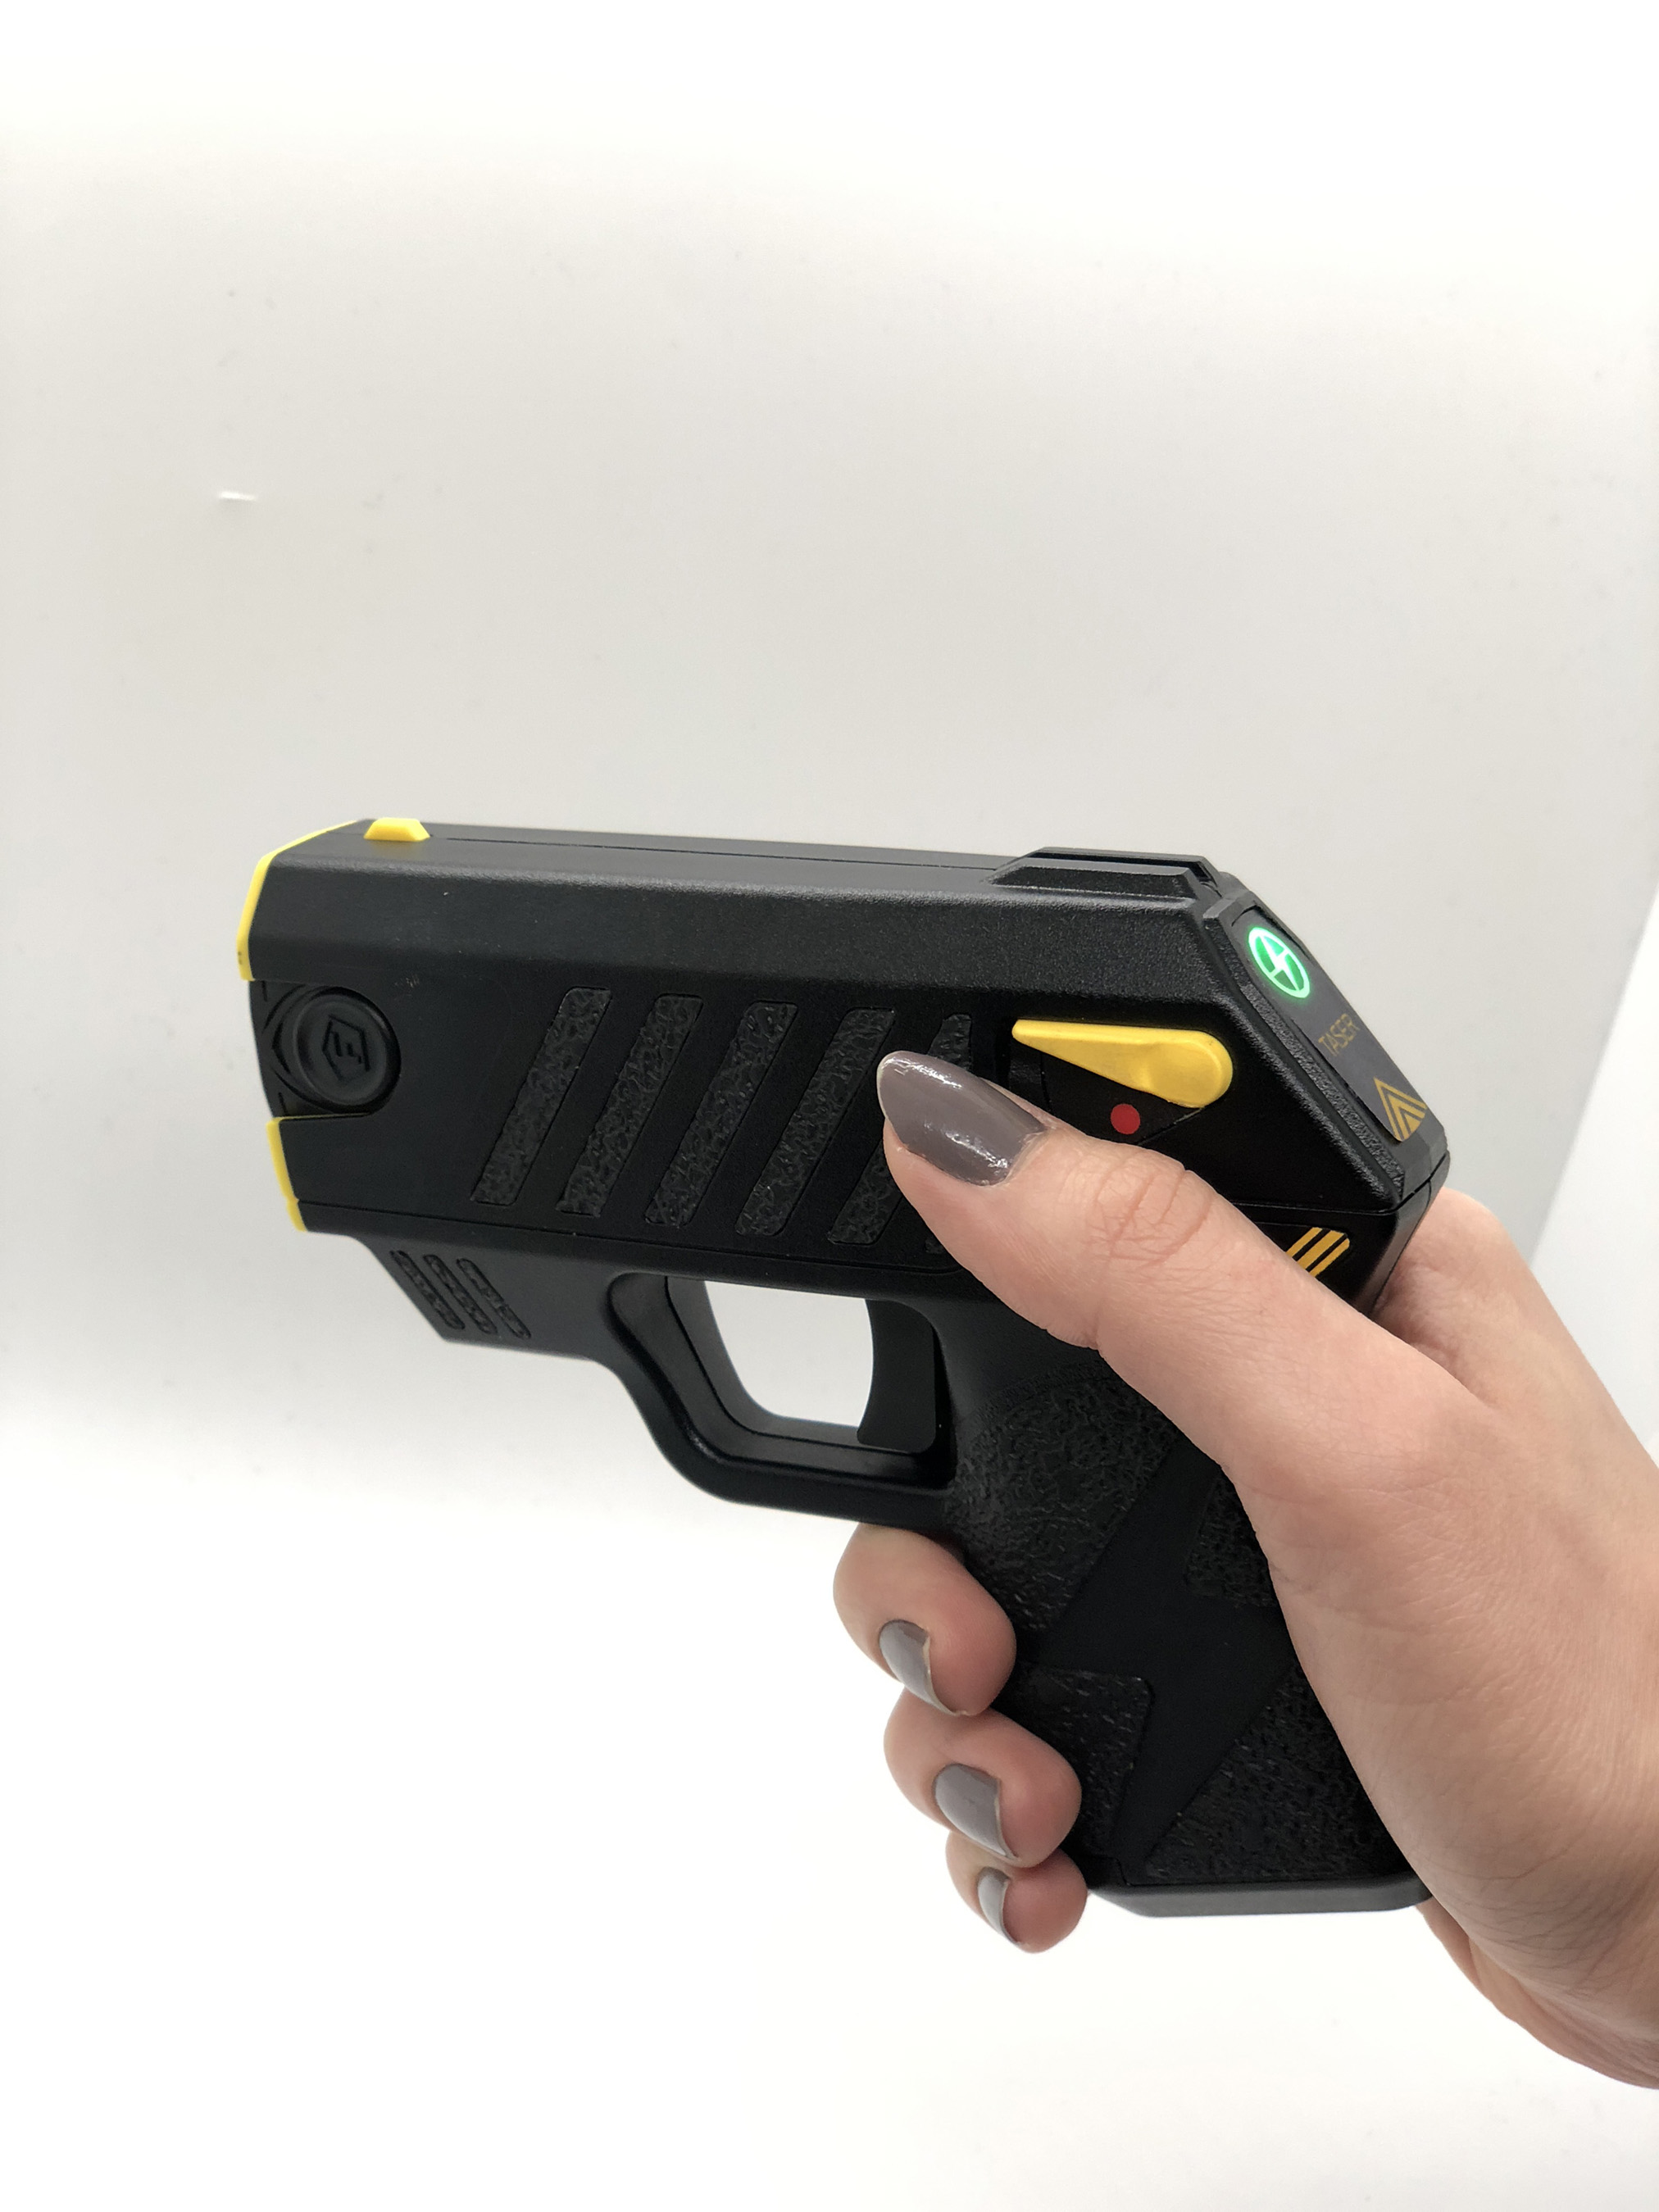 Are Tasers good for self-defense?